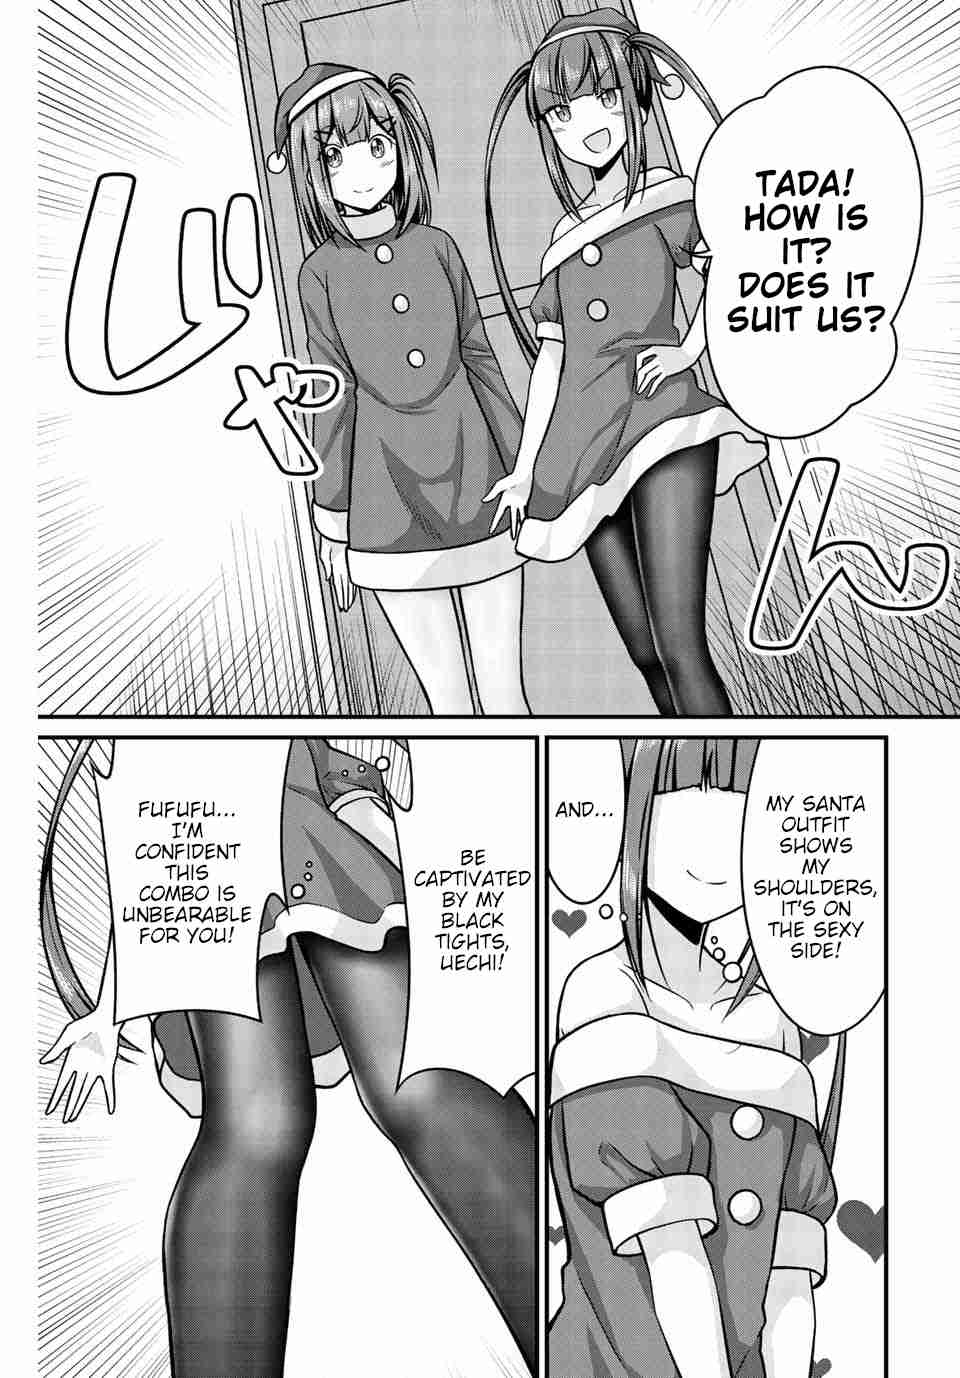 Arigatights! Vol. 2 Ch. 30 Christmas and Tights